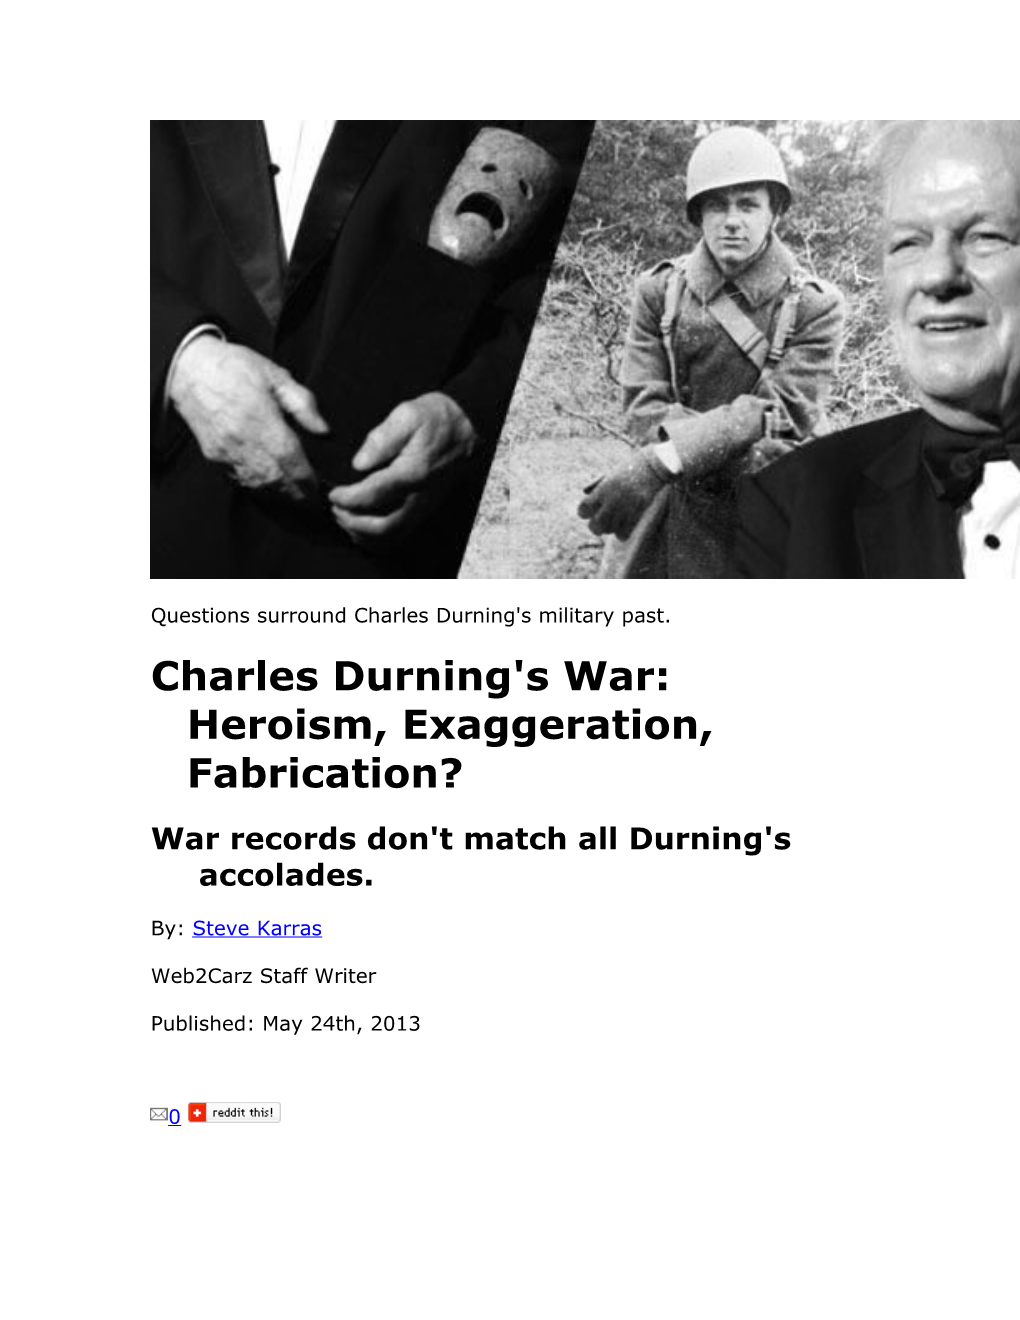 Charles Durning's War: Heroism, Exaggeration, Fabrication?